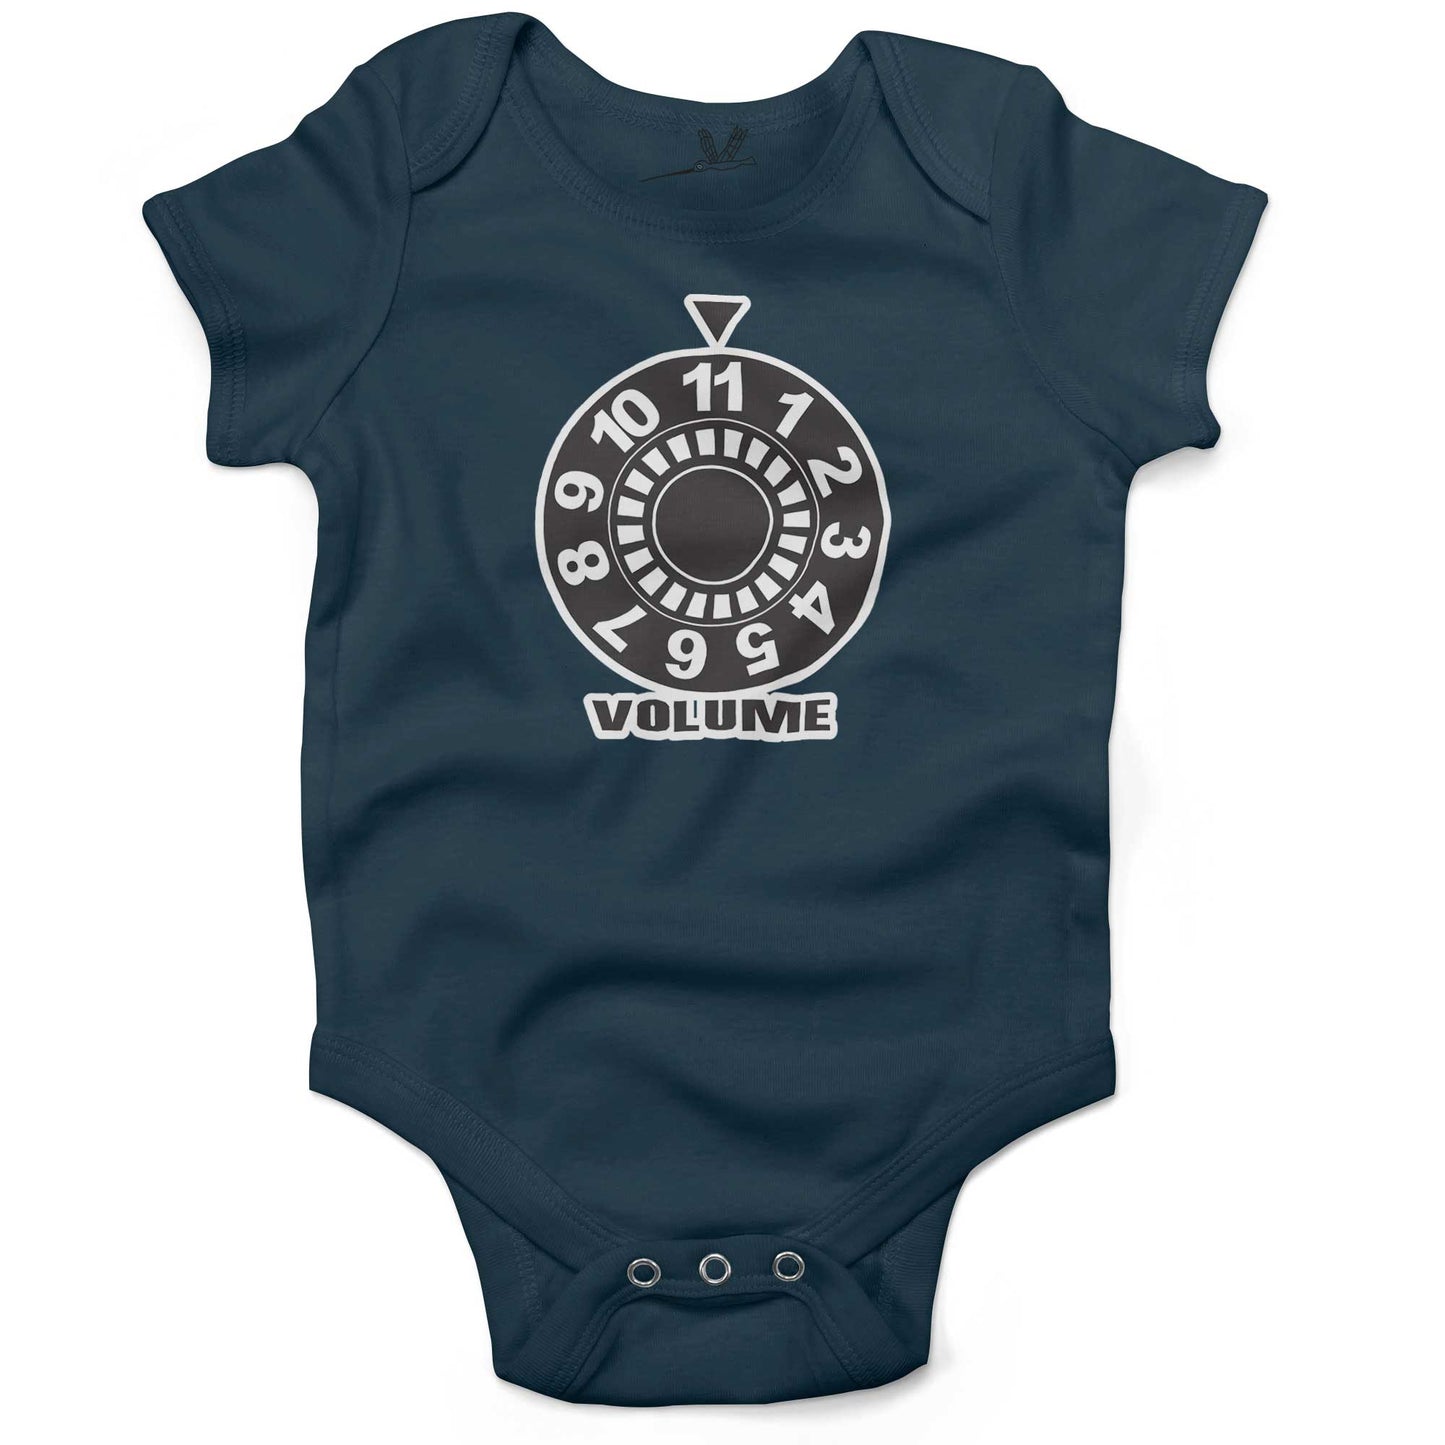 Turn It Up To 11 Infant Bodysuit or Raglan Baby Tee-Organic Pacific Blue-3-6 months